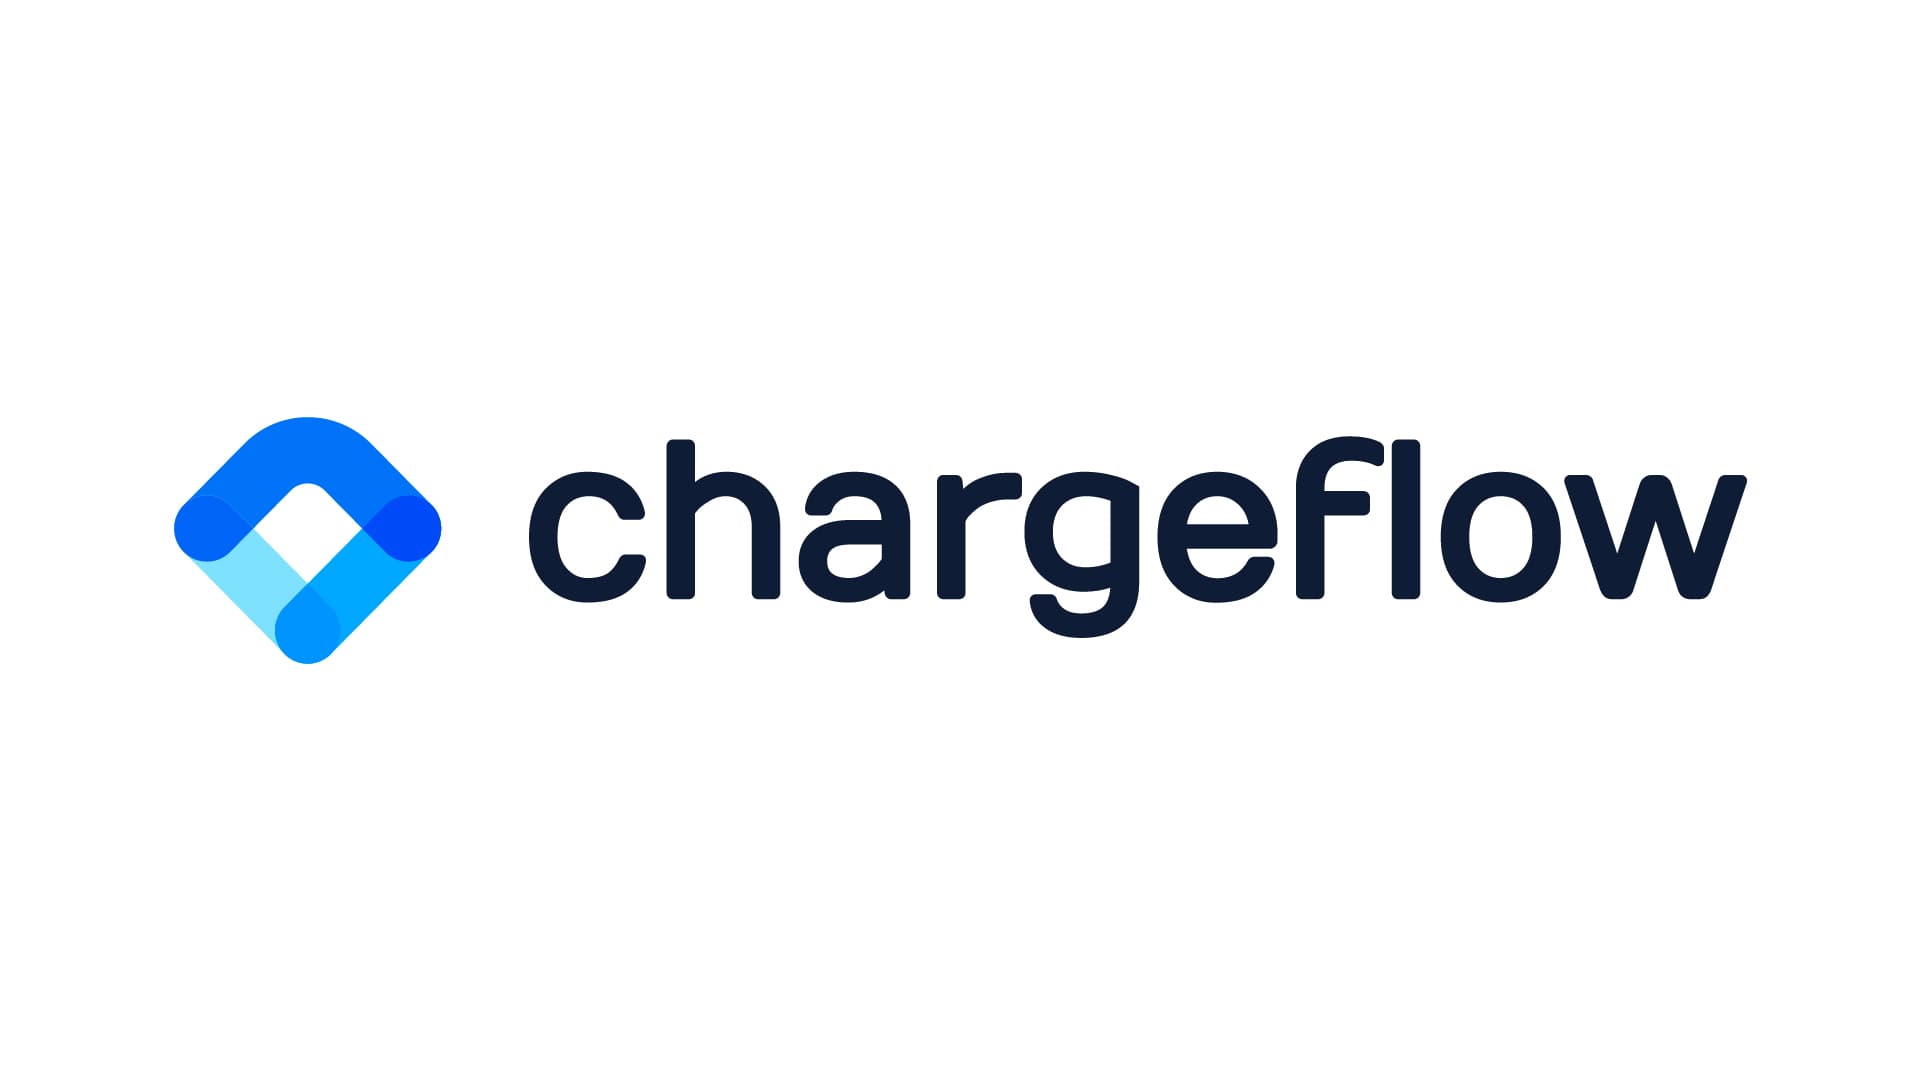 Chargeflow、AIを活用してチャージバックと戦う、1,400万ドル調達